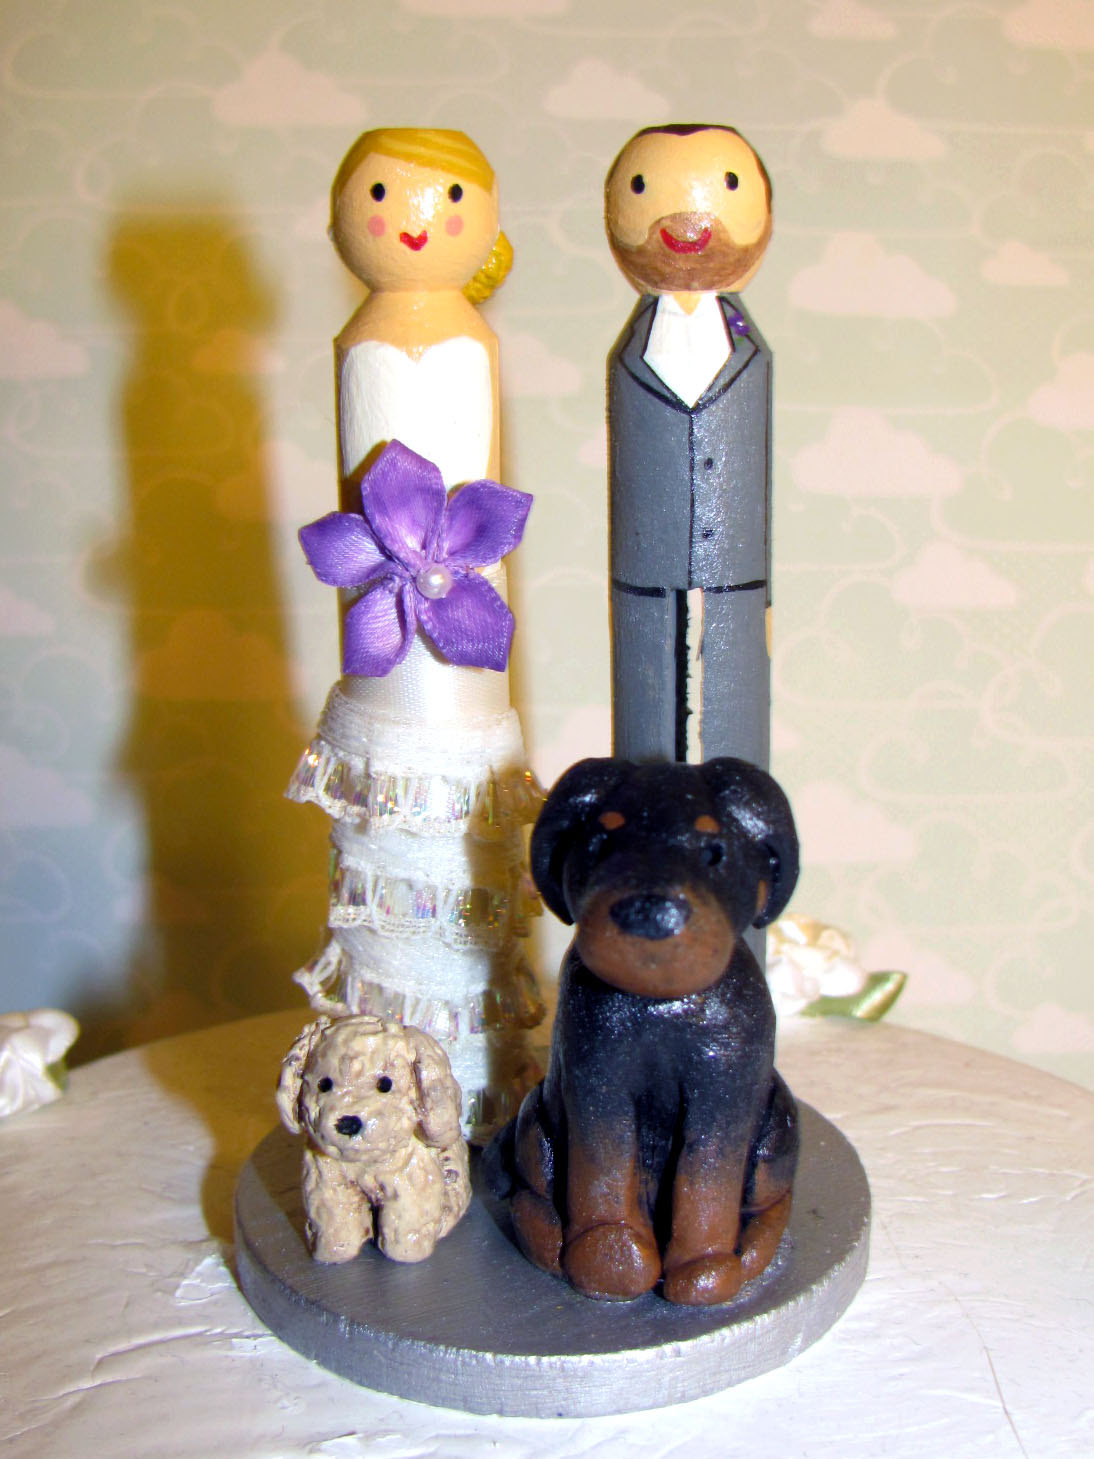 Post your cake topper!